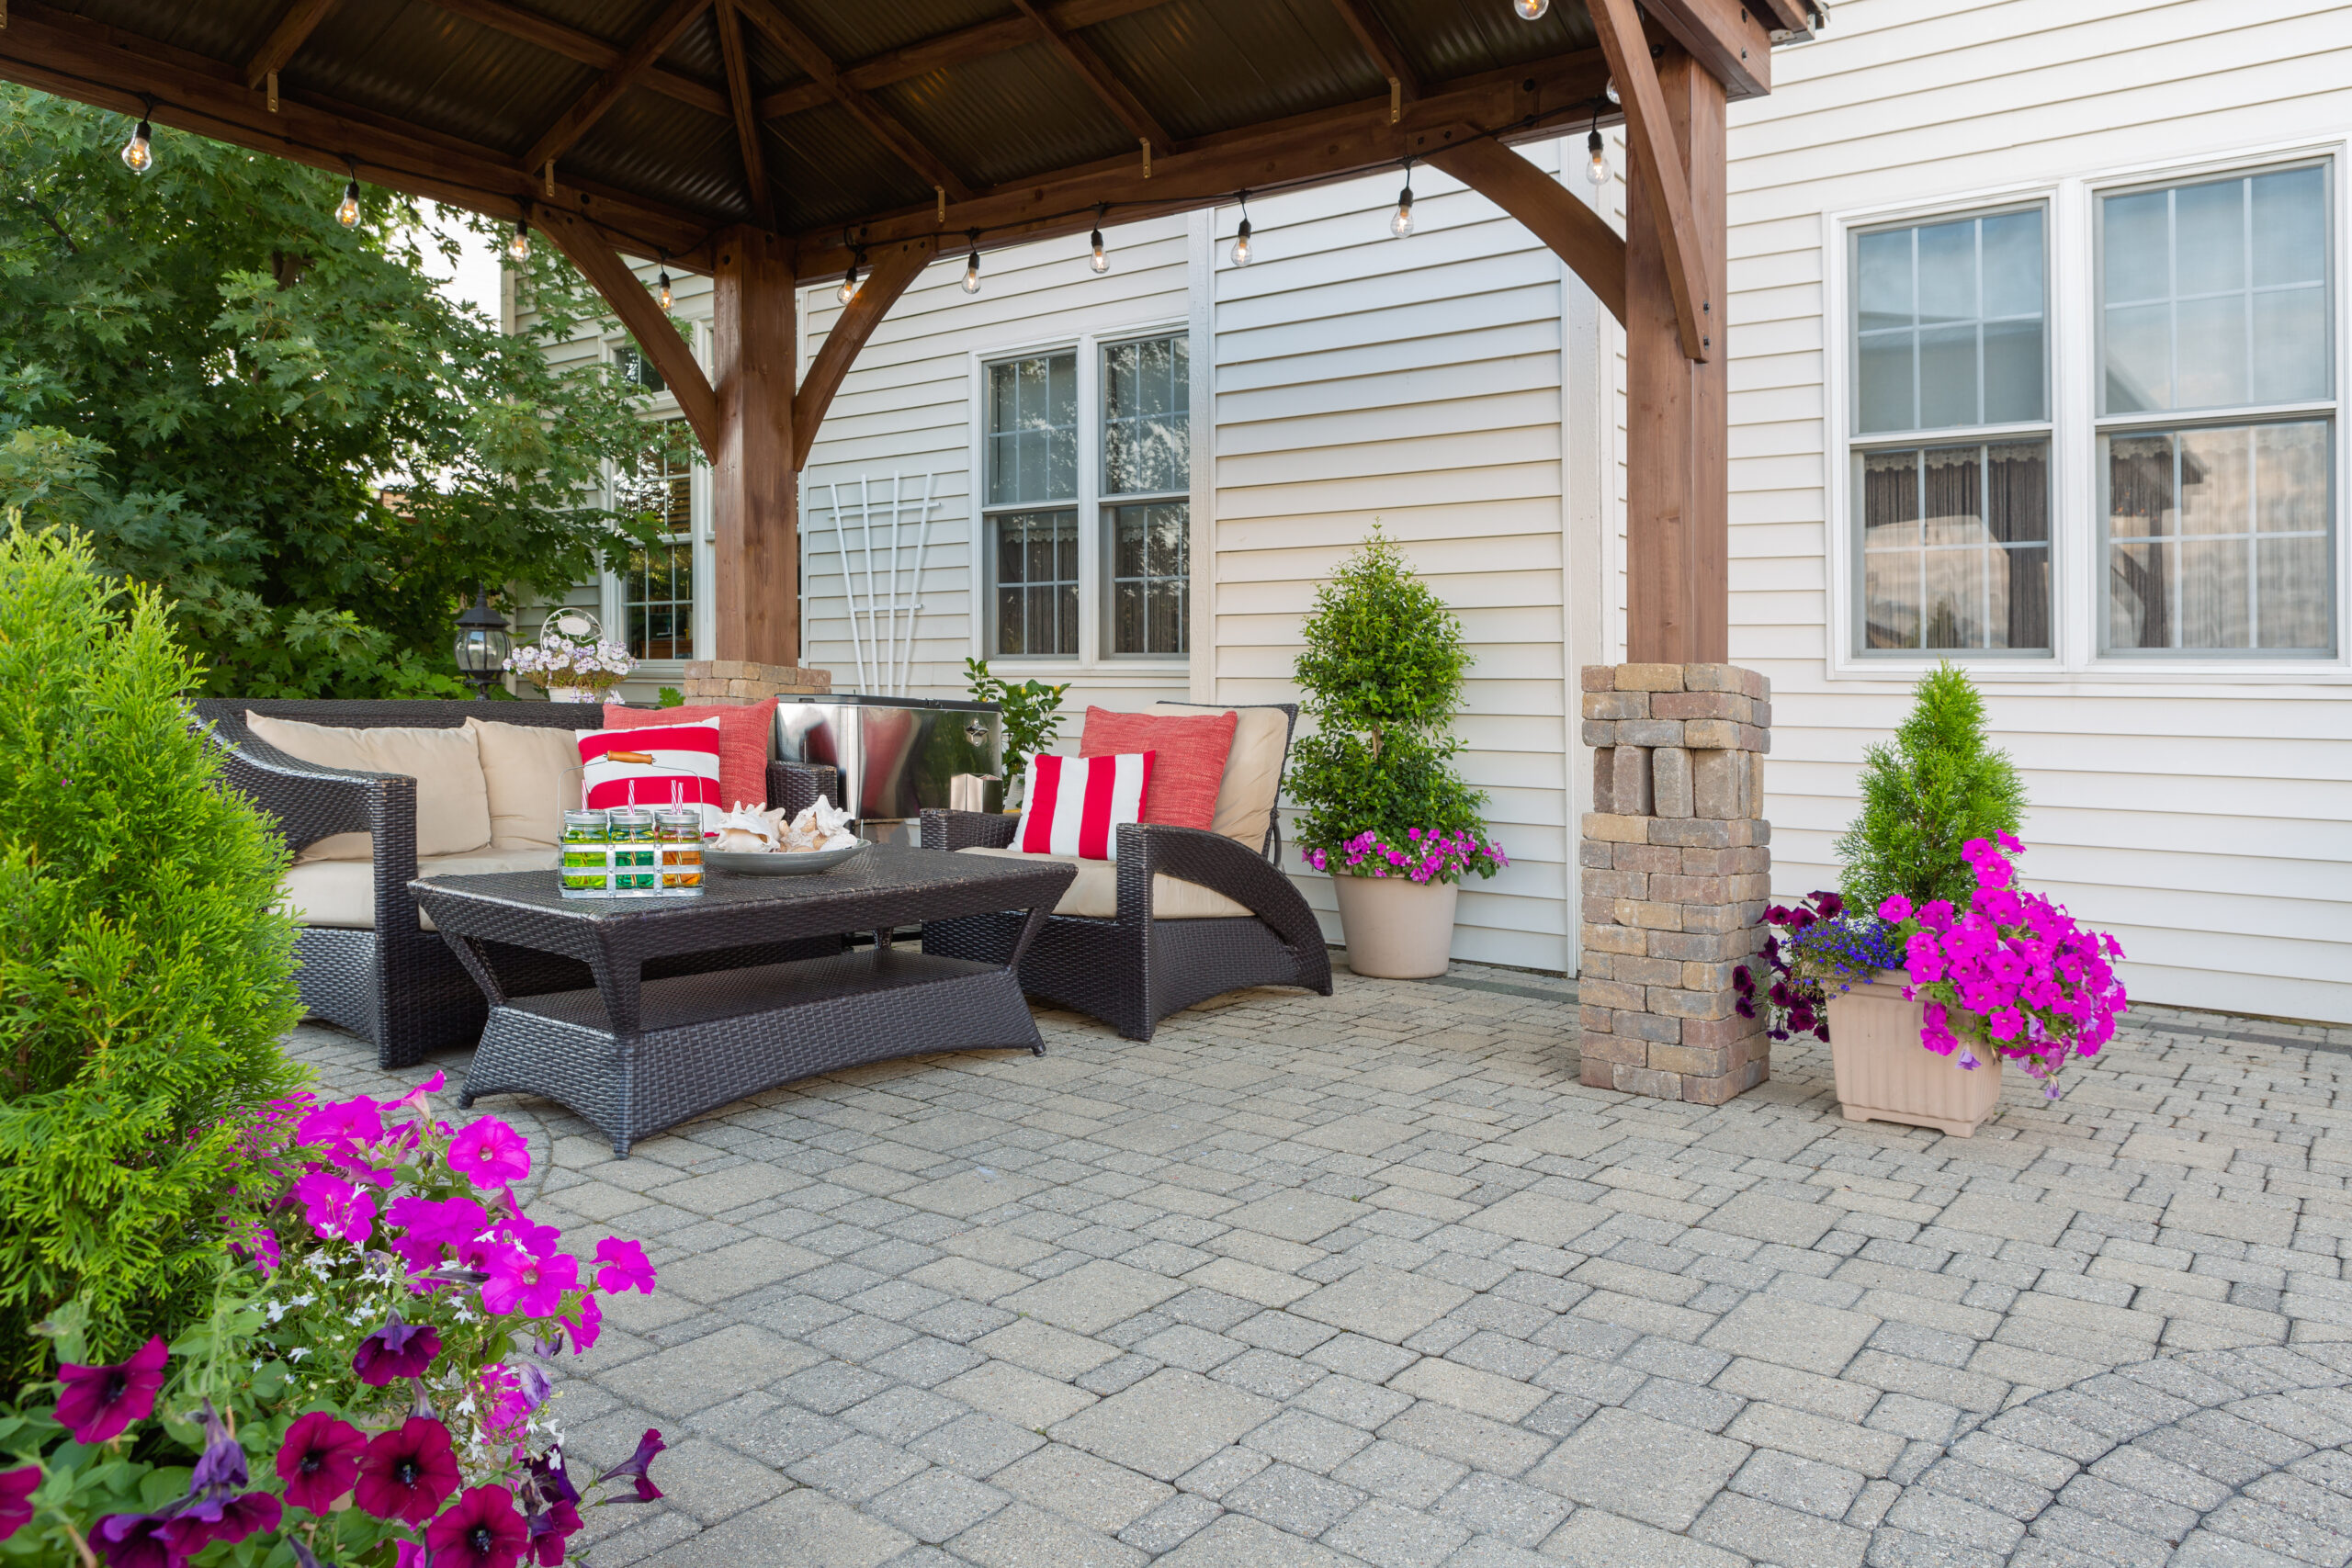 Patio Designs To Inspire Your Home